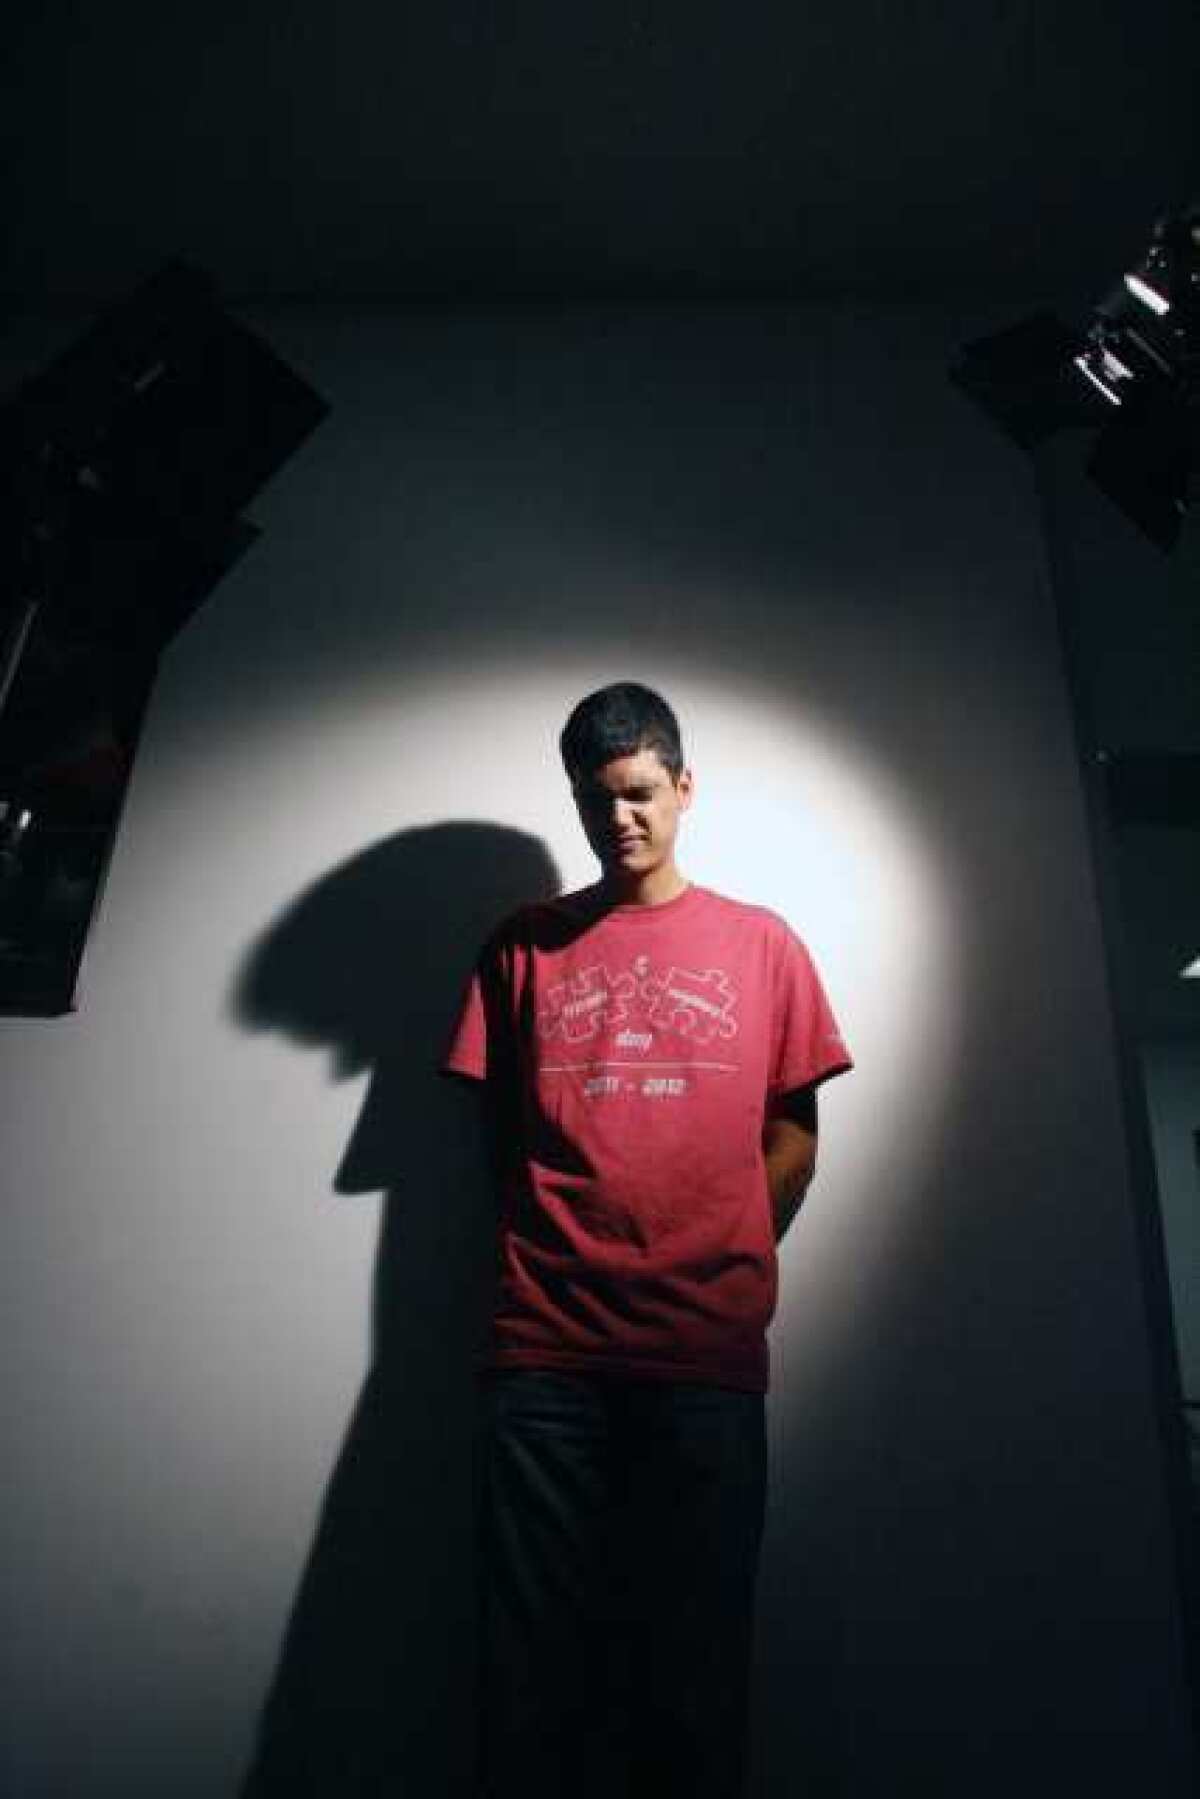 Armen Ter-Zakarian, 19, stands between two lights during a lighting and camera class at International Academy of Film and Television in Burbank.